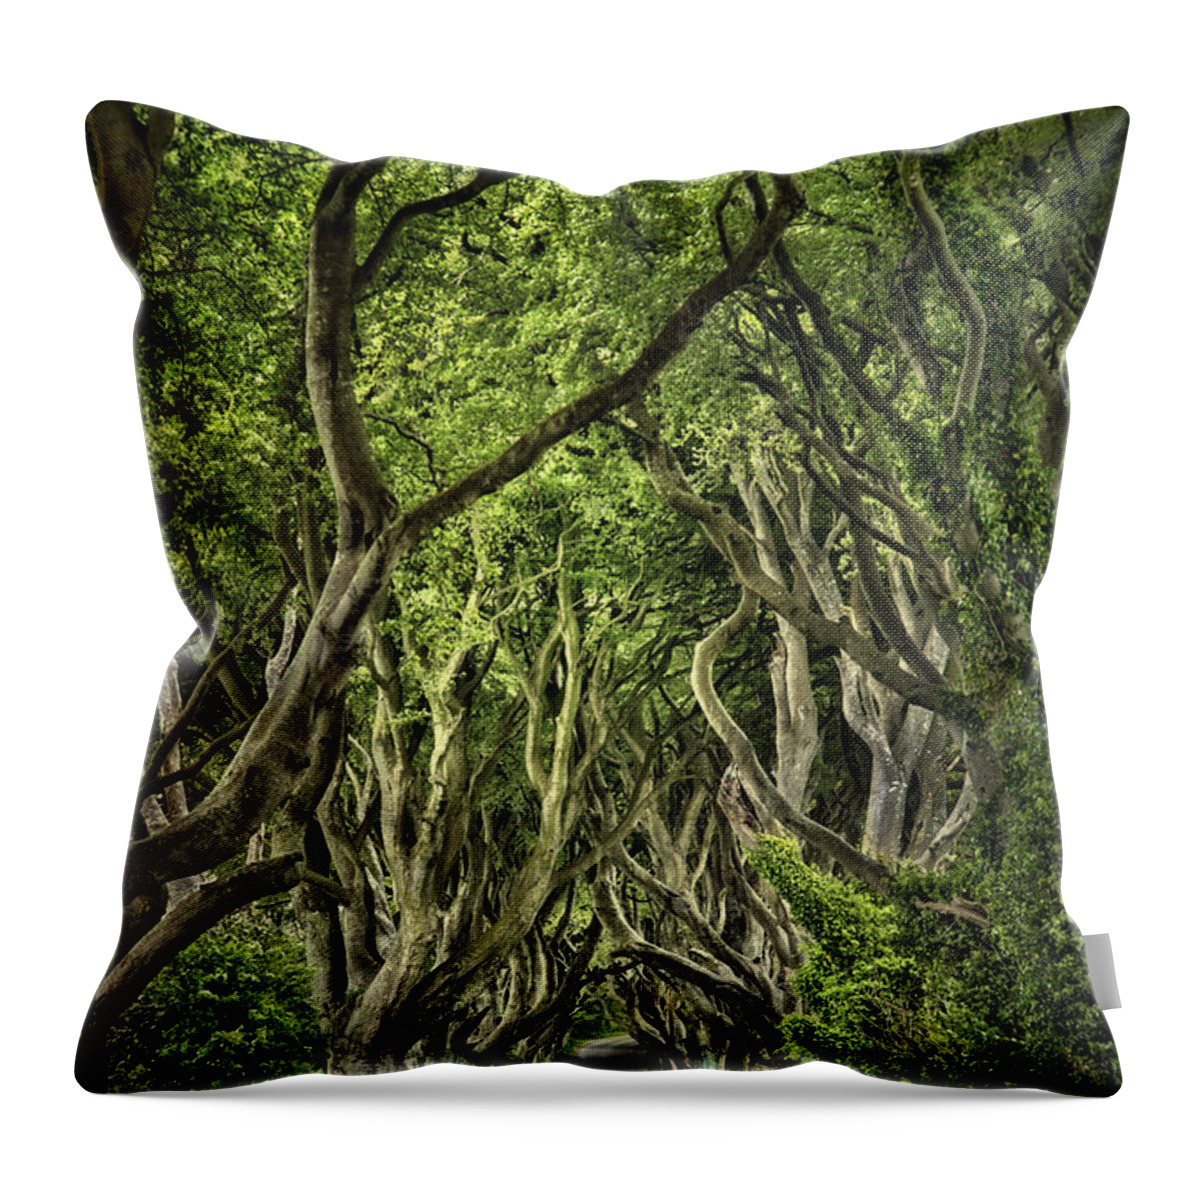 Dark Hedges Throw Pillow featuring the photograph The Dark Hedges by Evelina Kremsdorf